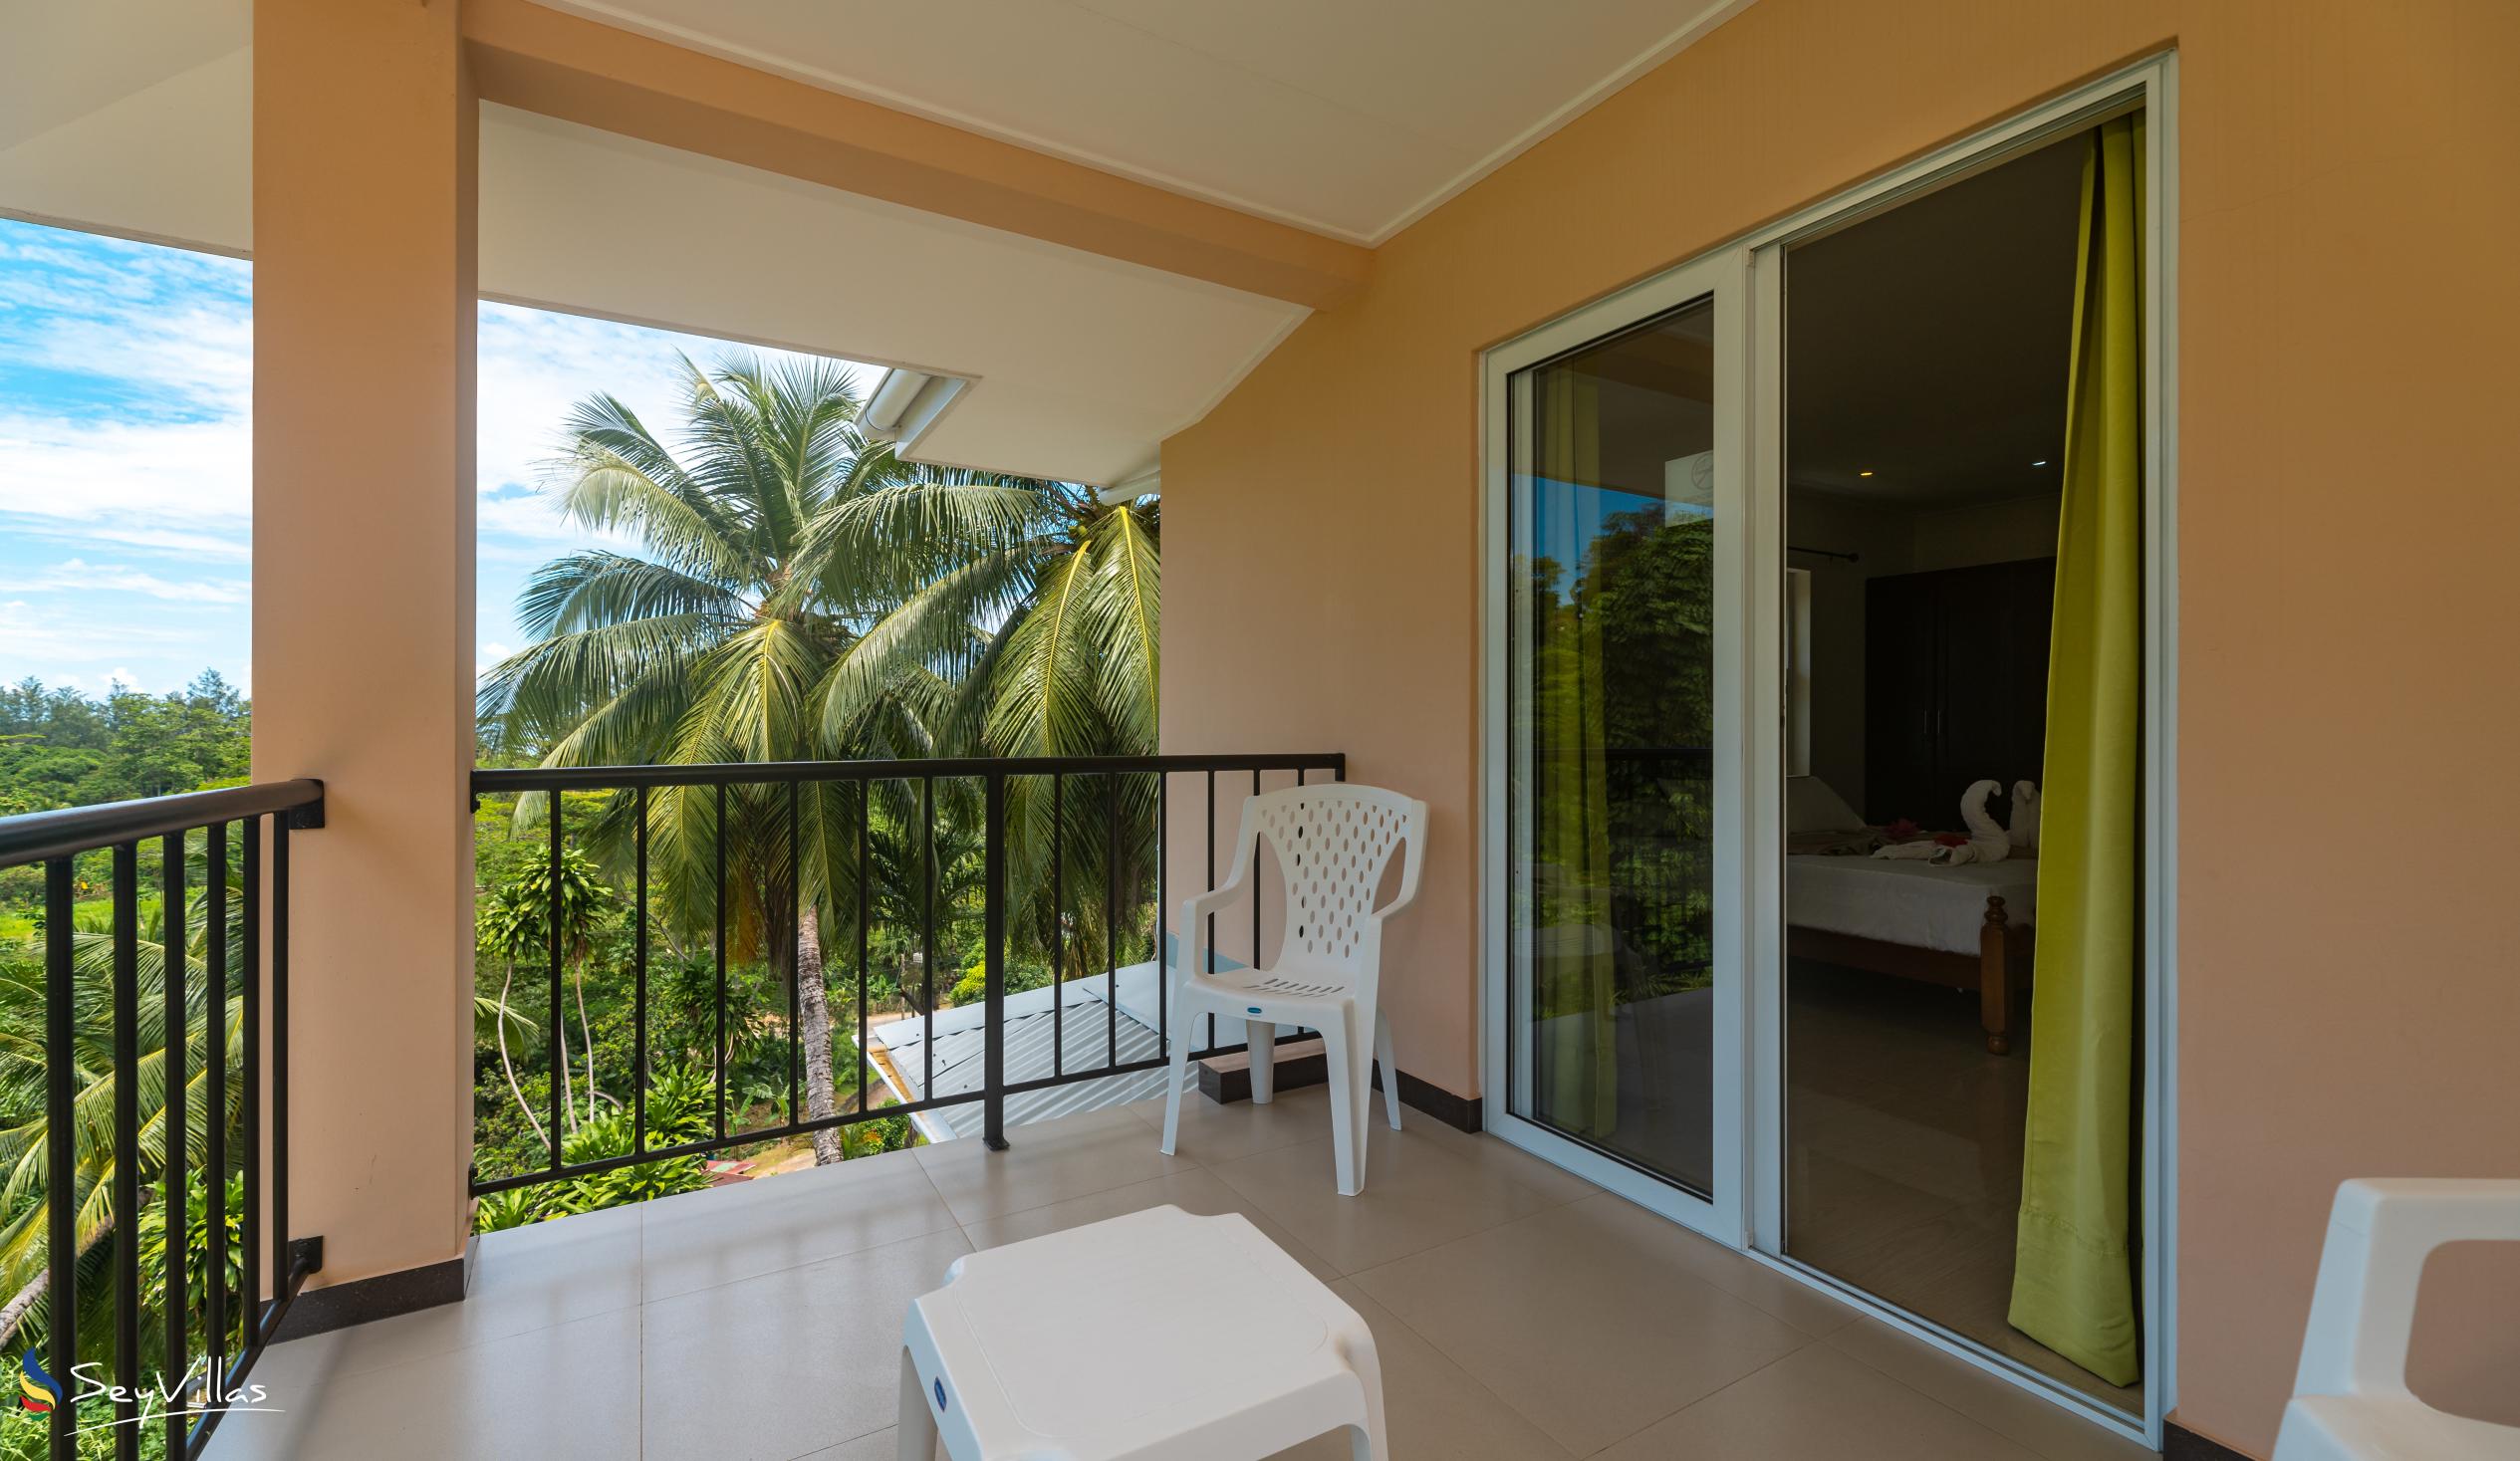 Foto 58: JAIDSS Holiday Apartments - Appartement 2 chambres - Mahé (Seychelles)